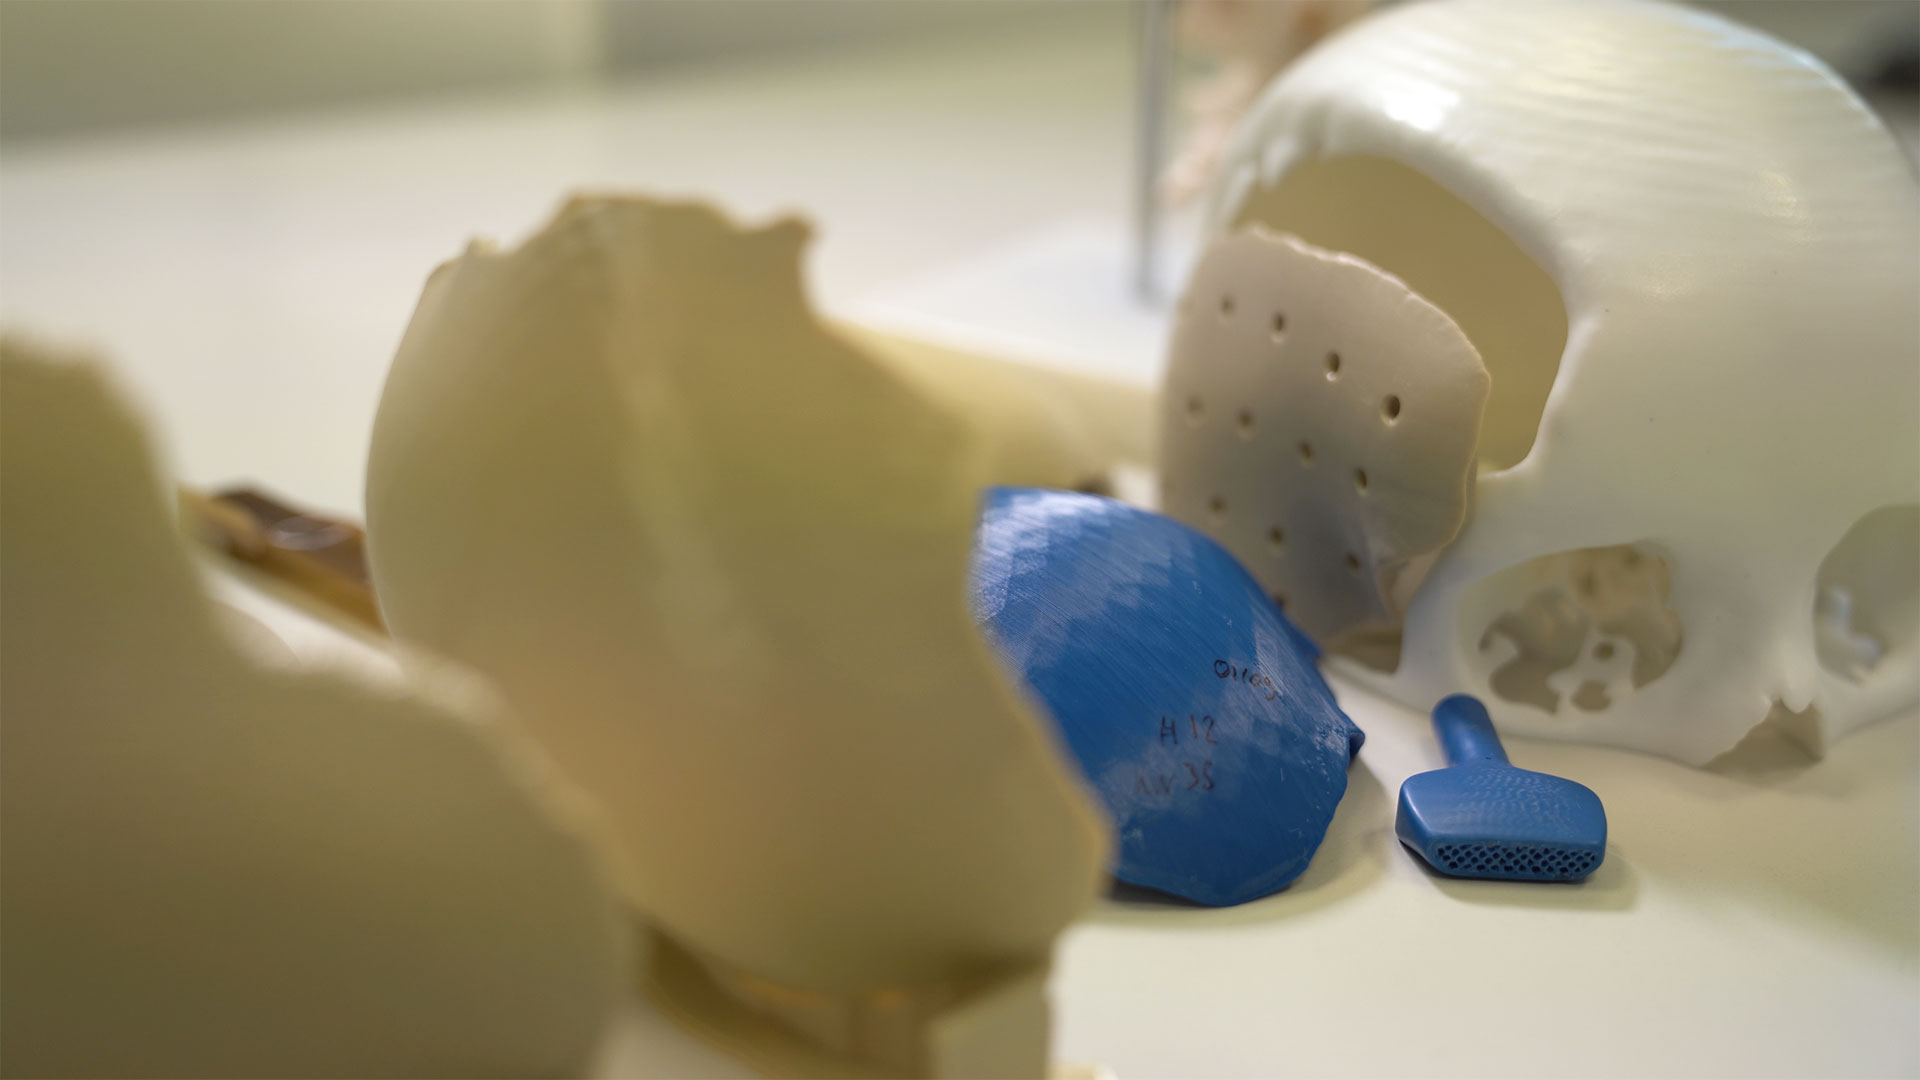 Kumovis 3D printing solutions draw upon a variety of polymers and medical applications ranging from cranioplasty to spinal fusion surgery. 